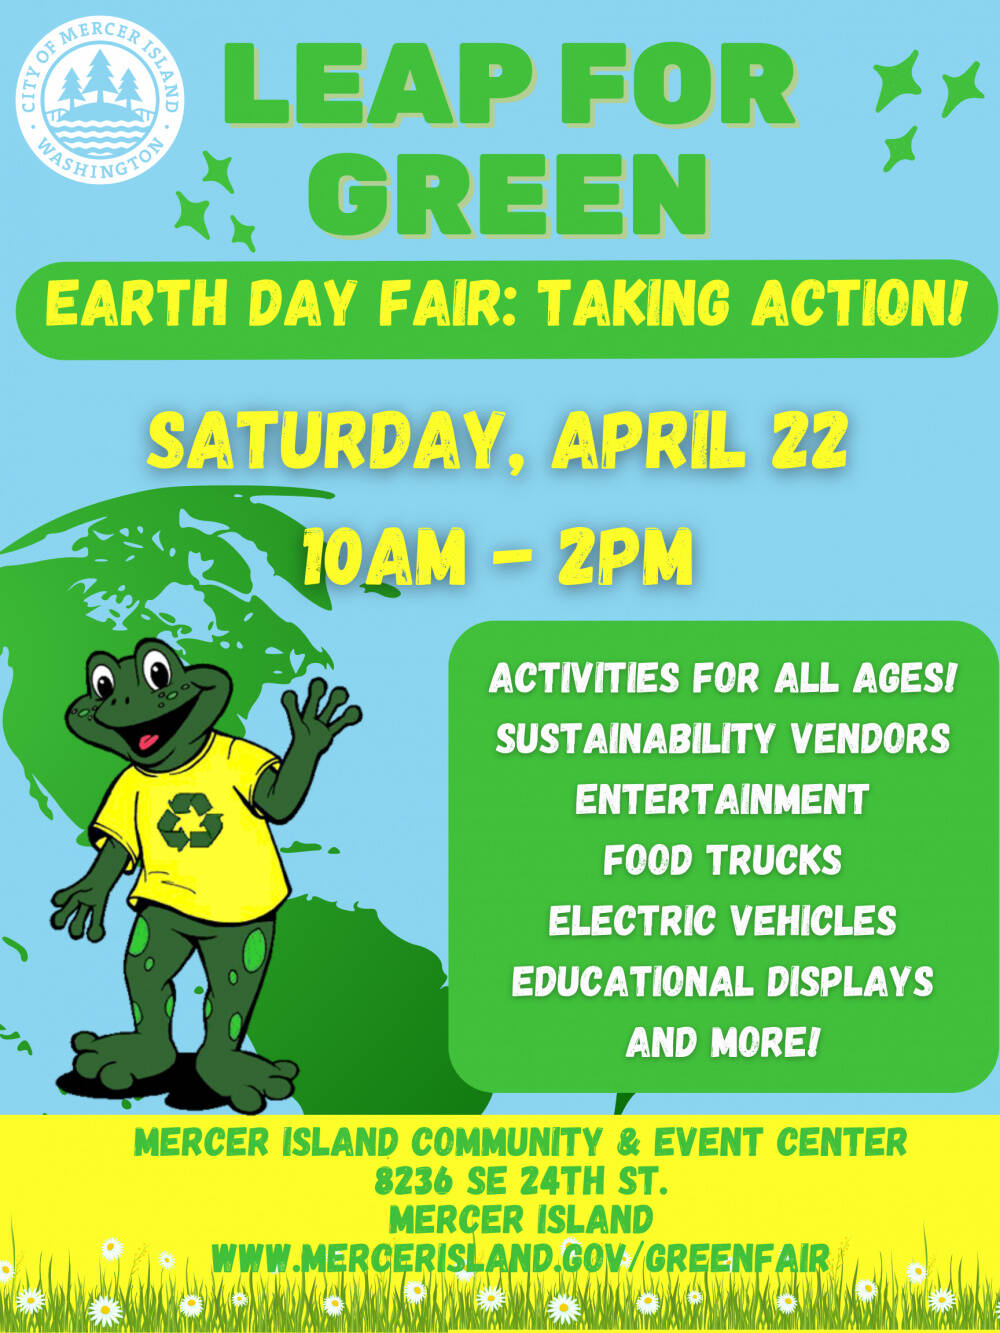 Leap for Green Earth Day Fair is 10 a.m. to 2 p.m. April 22 at the Mercer Island Community and Event Center. (Courtesy image)